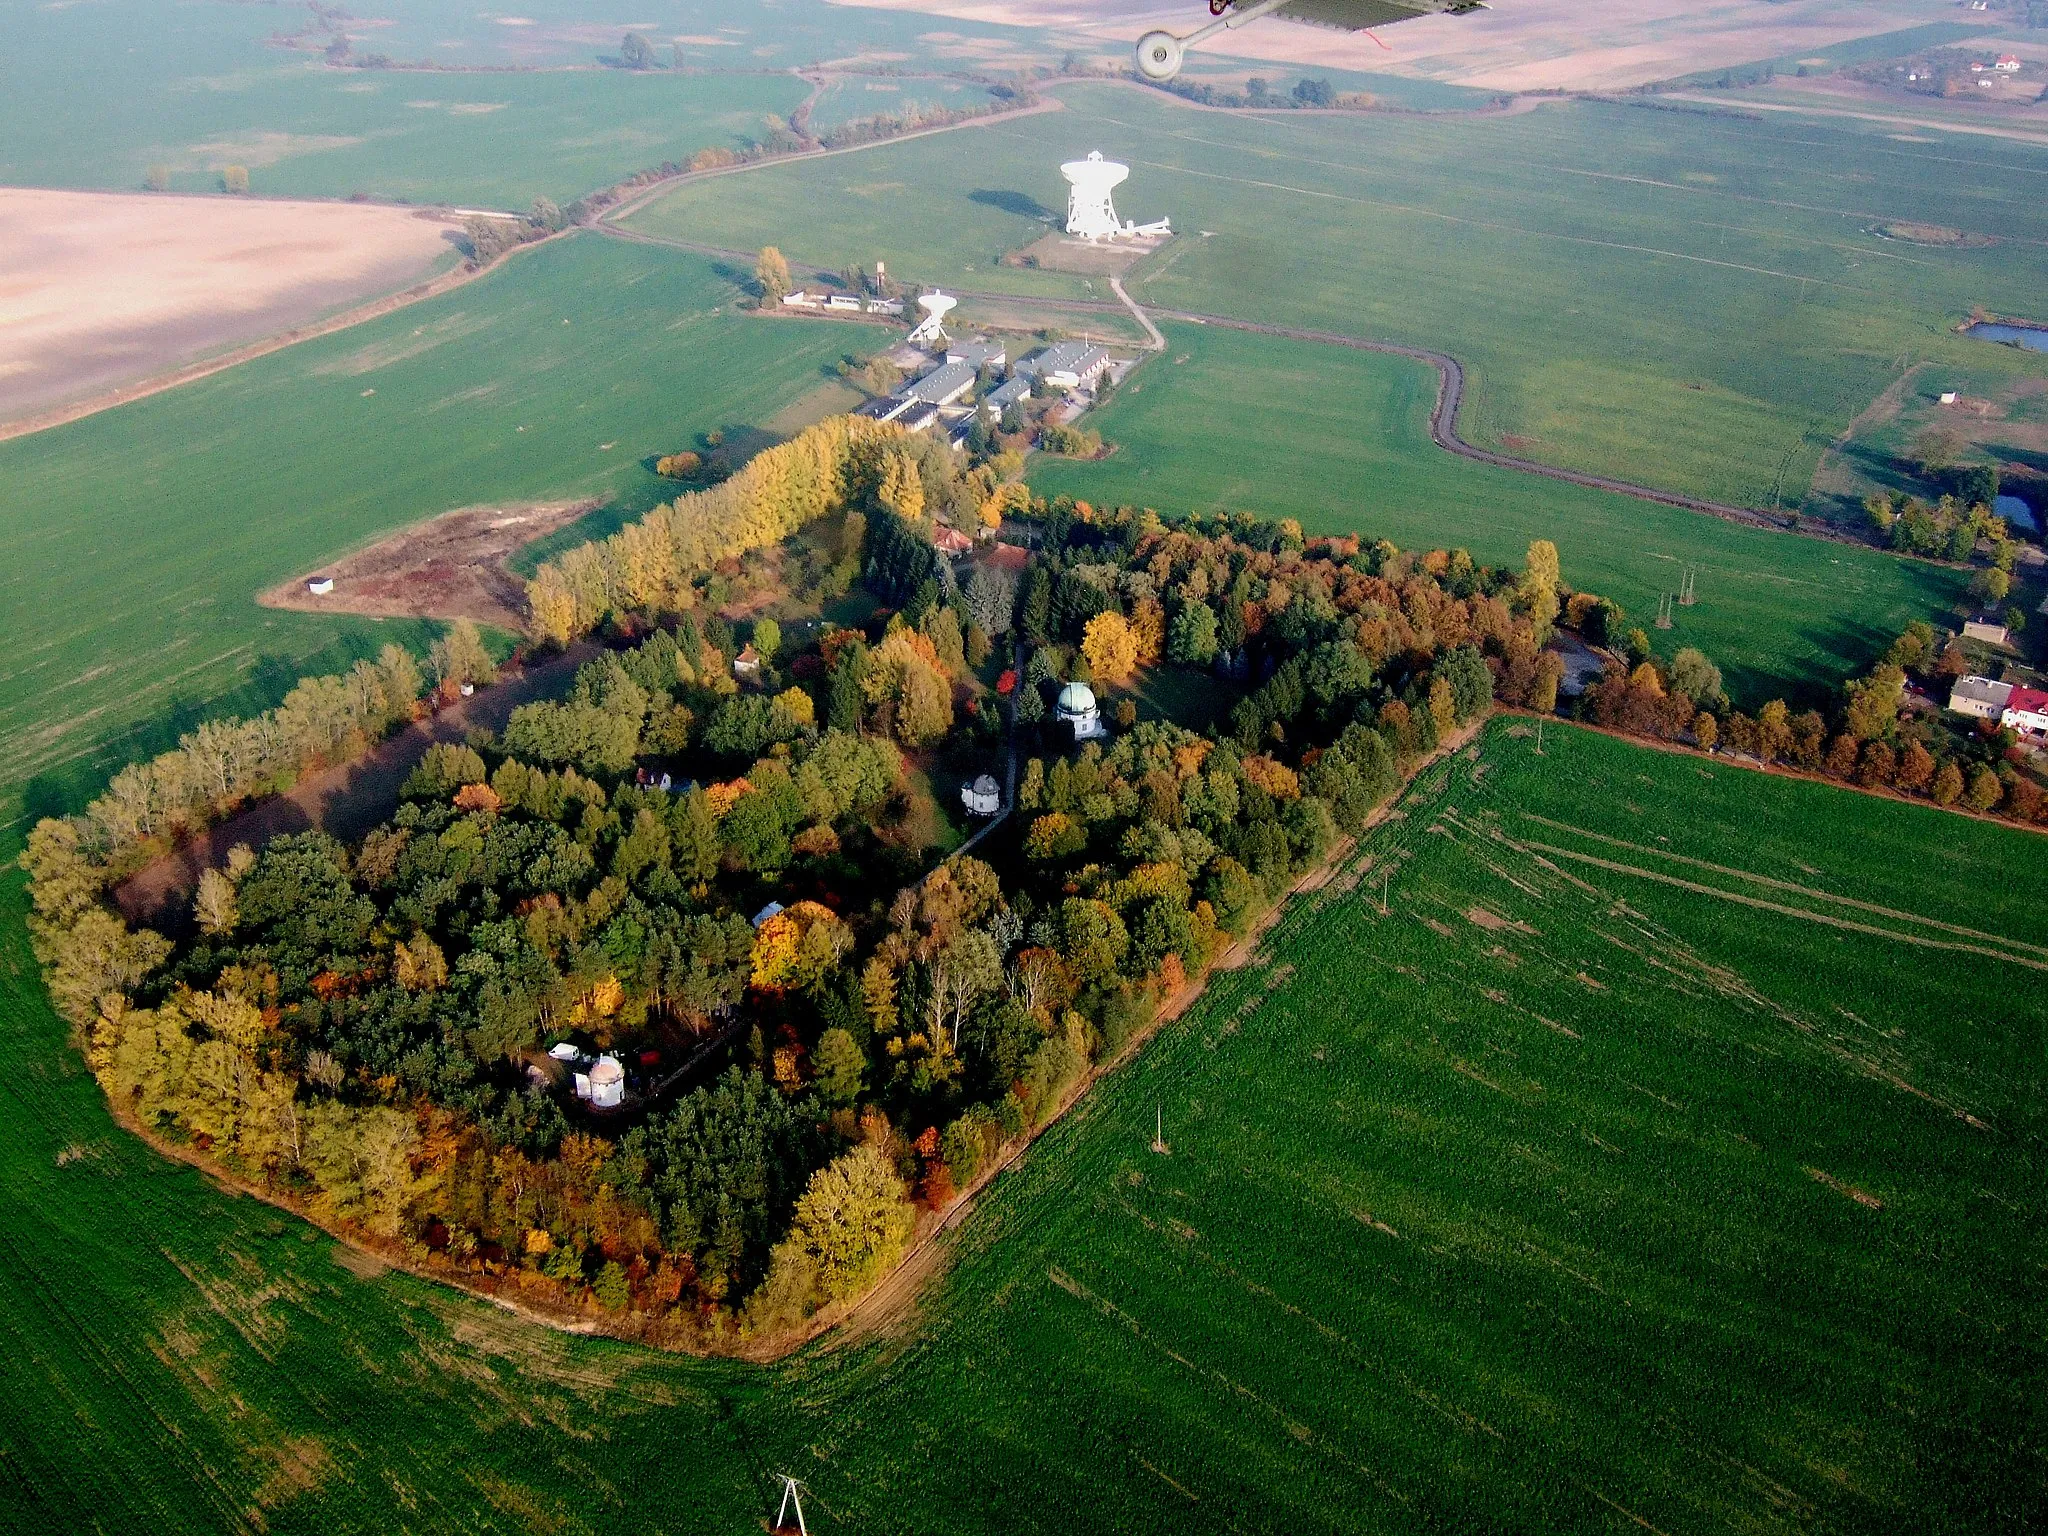 Photo showing: Astronomical observatory in Piwnice near Torun, Poland - aerial view.

photo author: Andrzej Kus